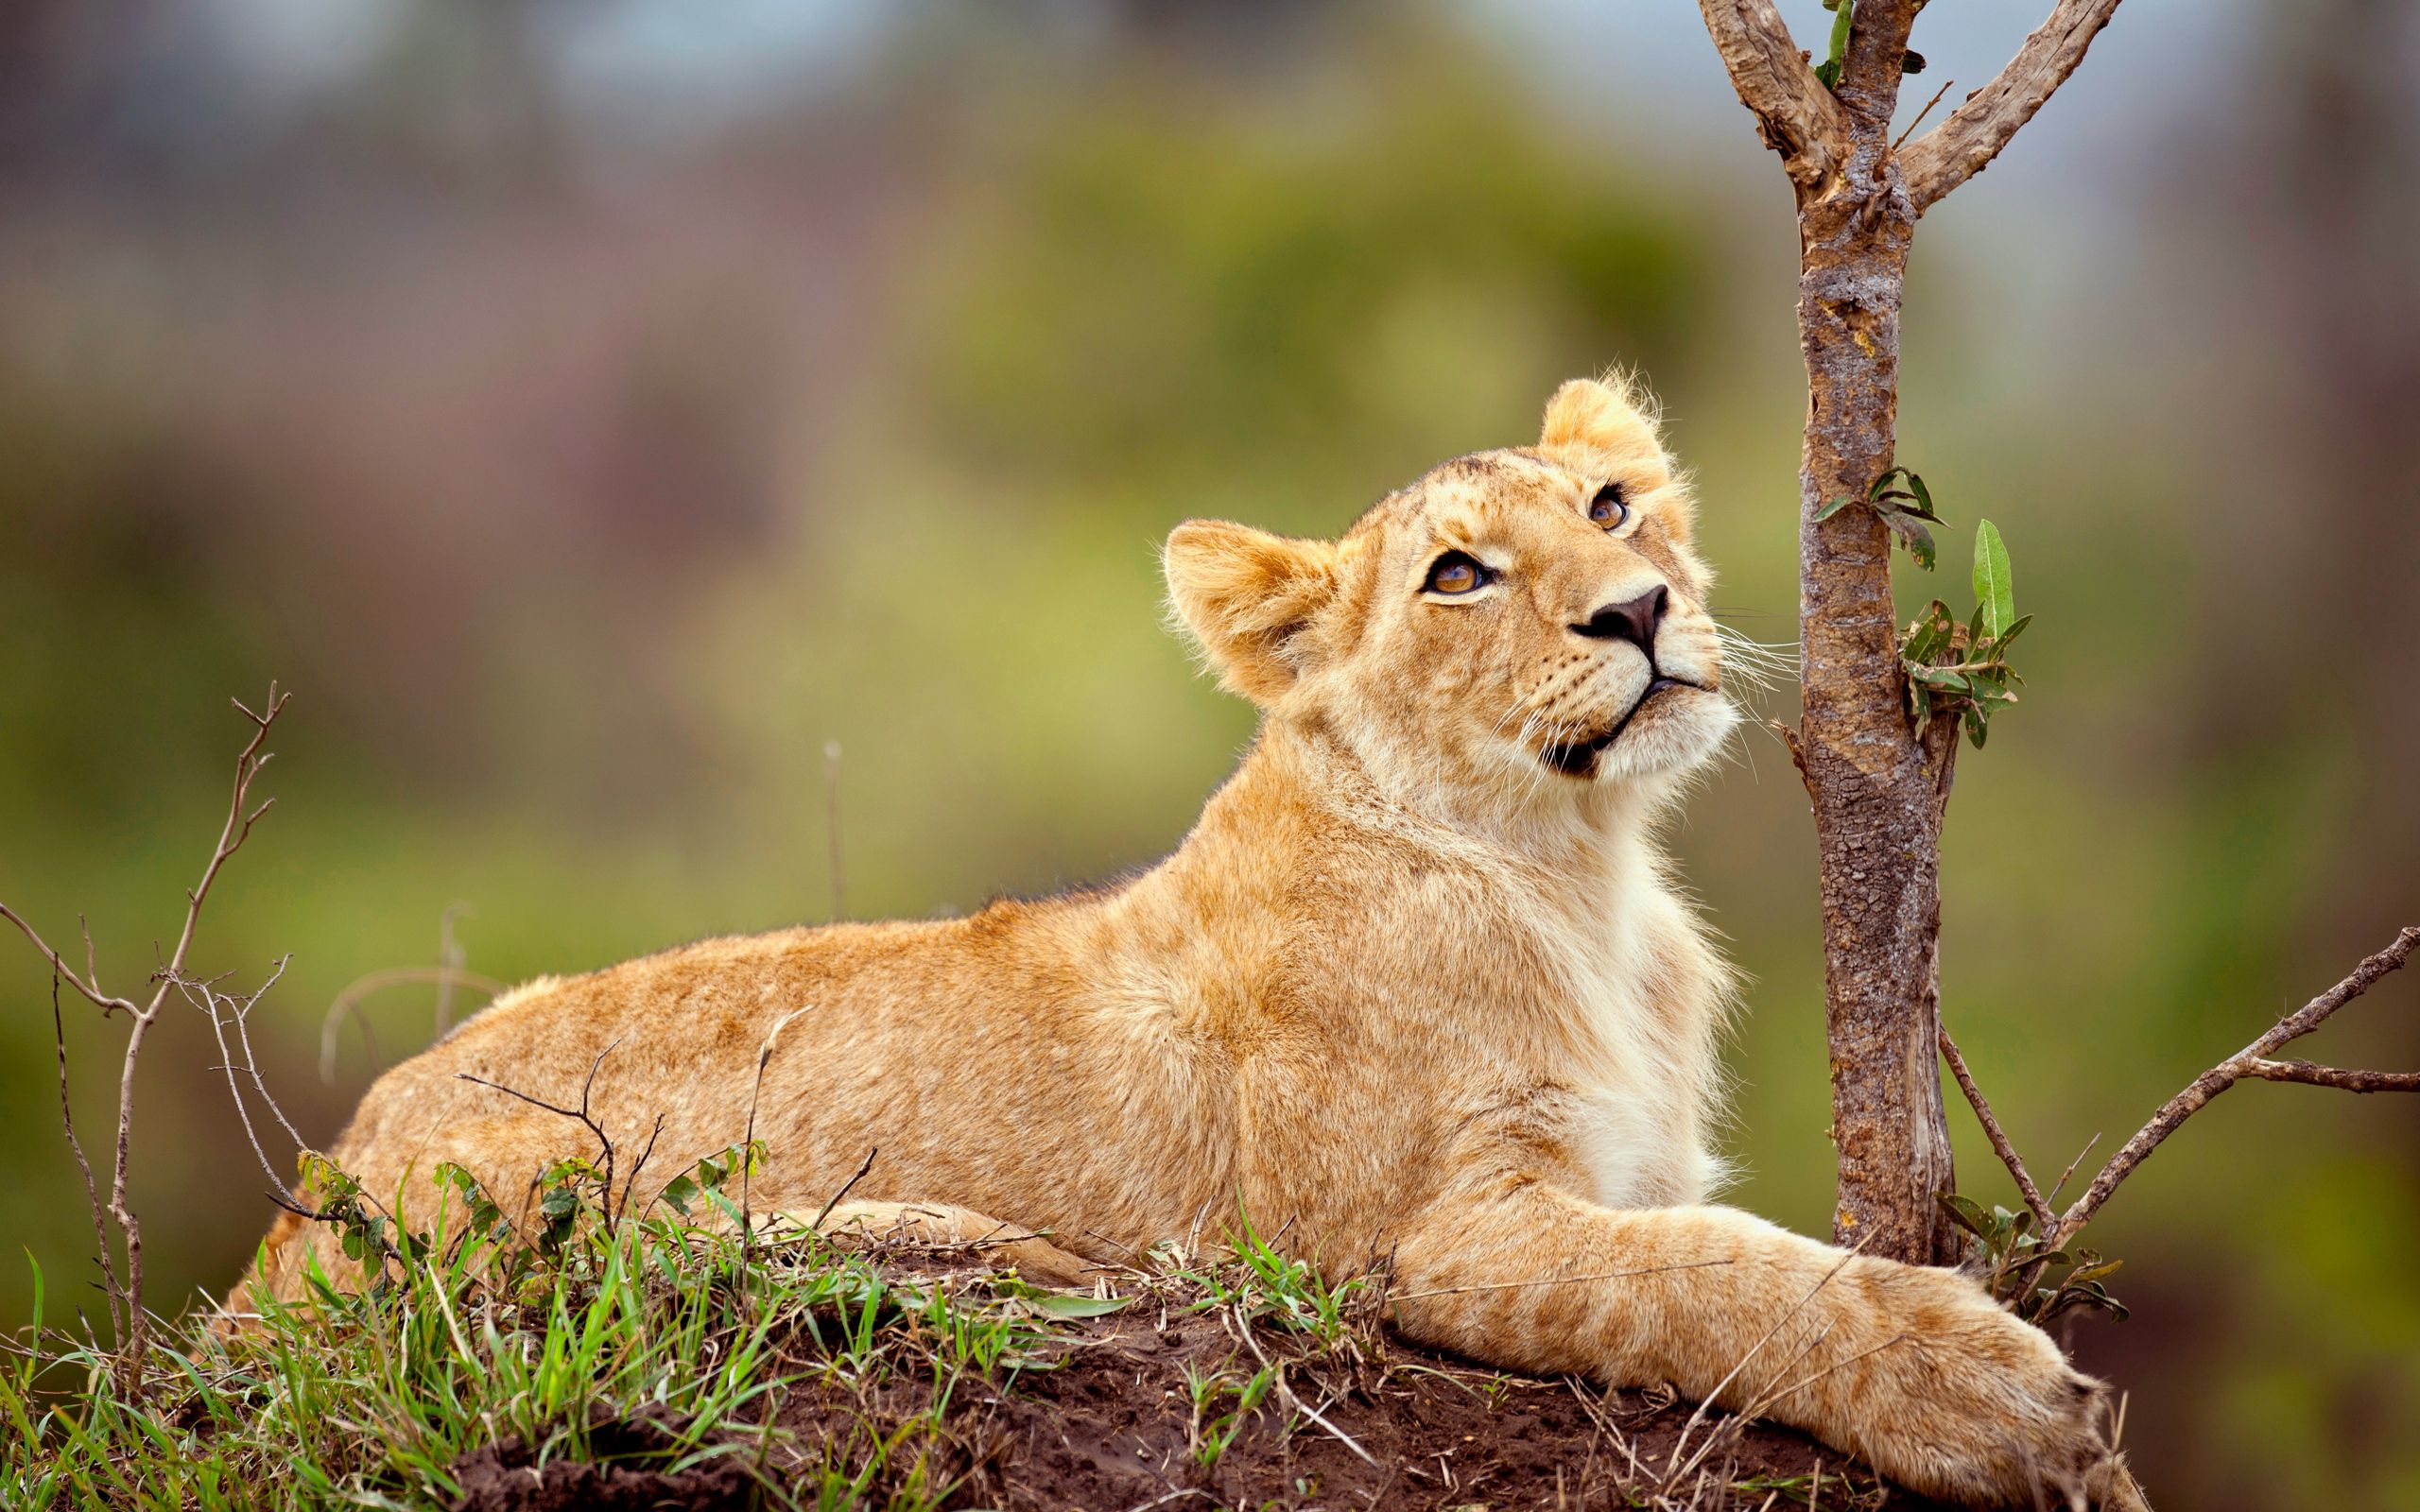 joey, animals, grass, young, to lie down, lie, branch, lion, lion cub lock screen backgrounds